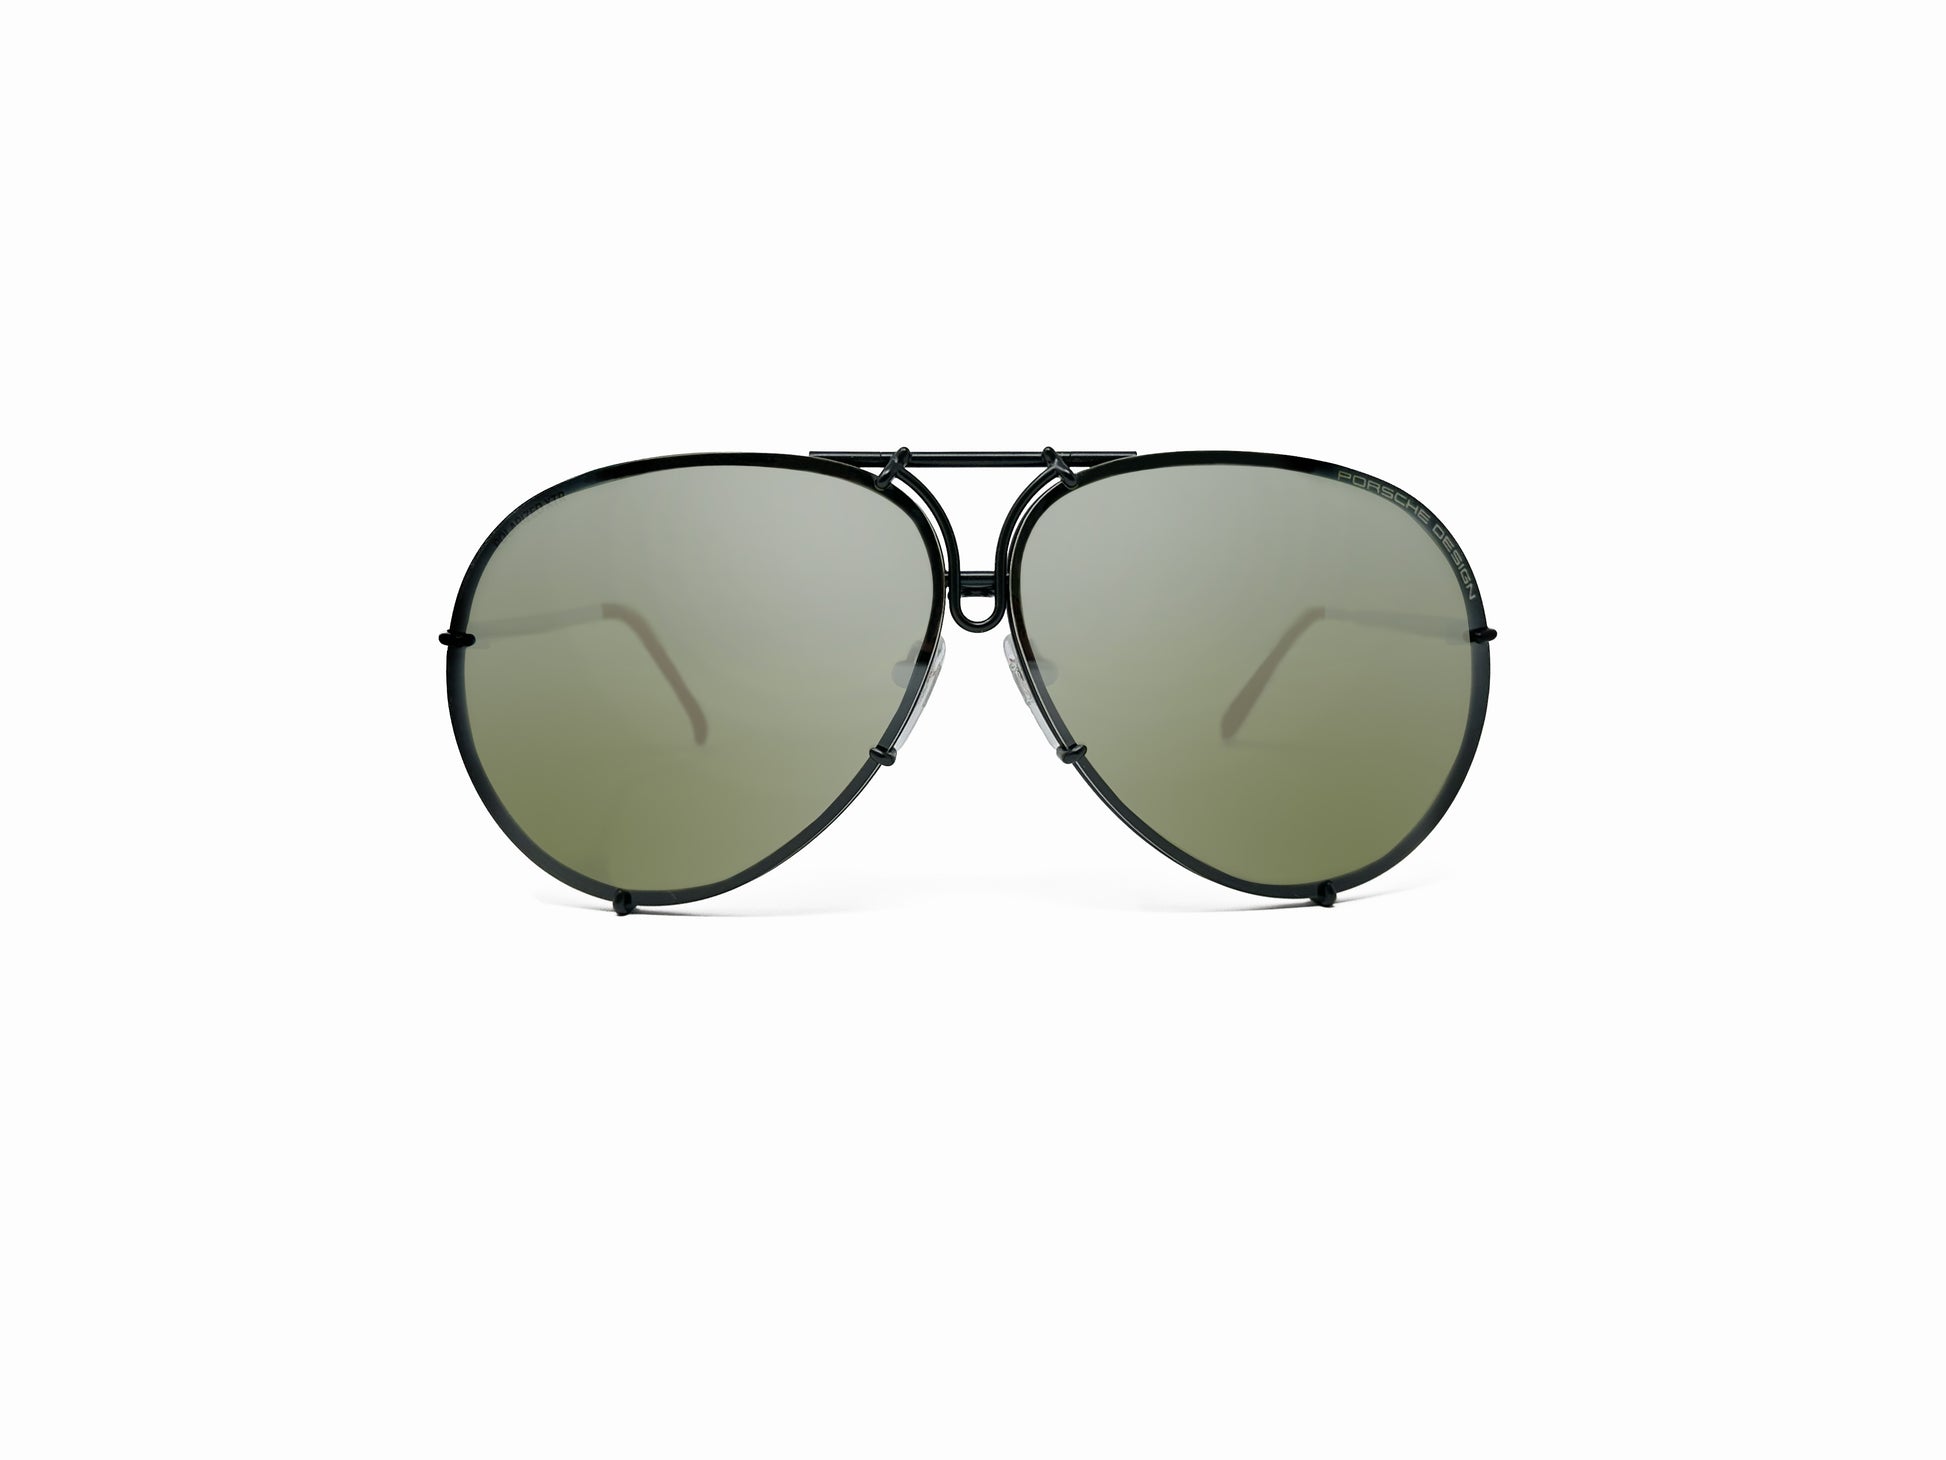 Porsche Design aviator style sunglass. Model: P8478. Color R - black with red temples. Front view. 